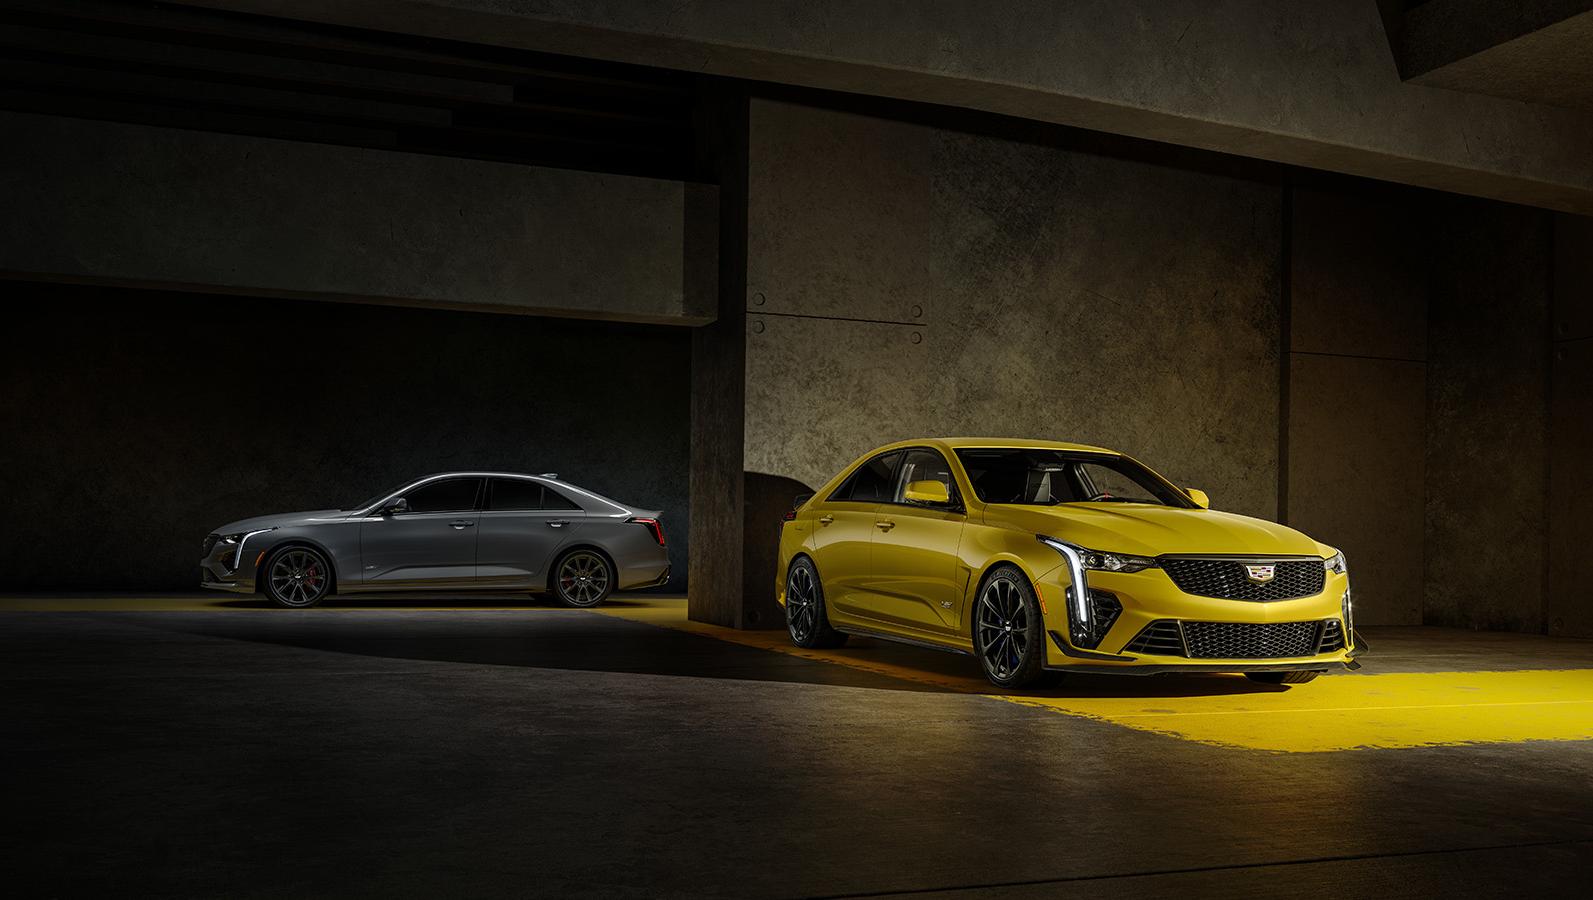 Cadillac CT4-V in Argent Silver Metallic and Cadillac CT4-V Blackwing in Cyber Yellow Metallic.